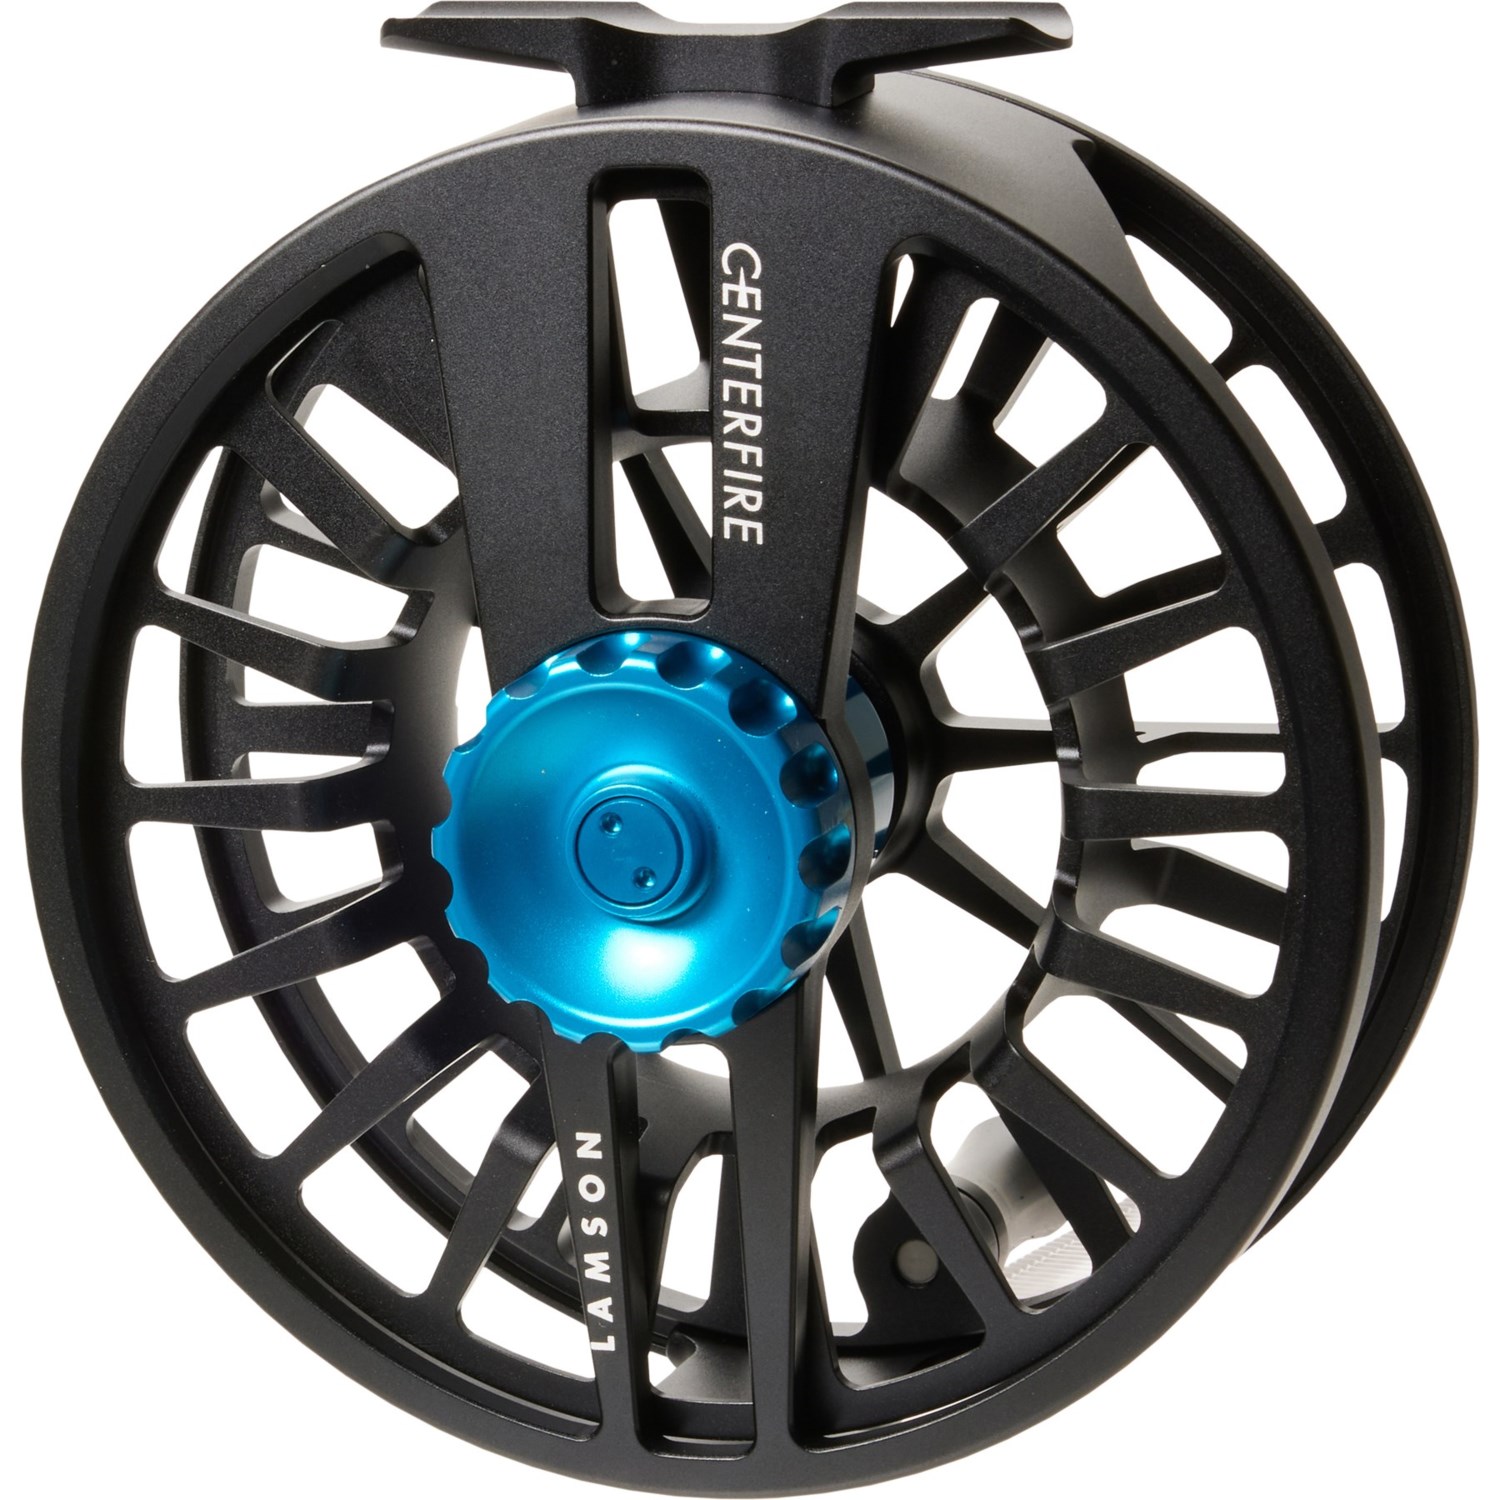 Lamson Centerfire 12 Fly Reel - 11-12wt, Factory Seconds - Save 36%